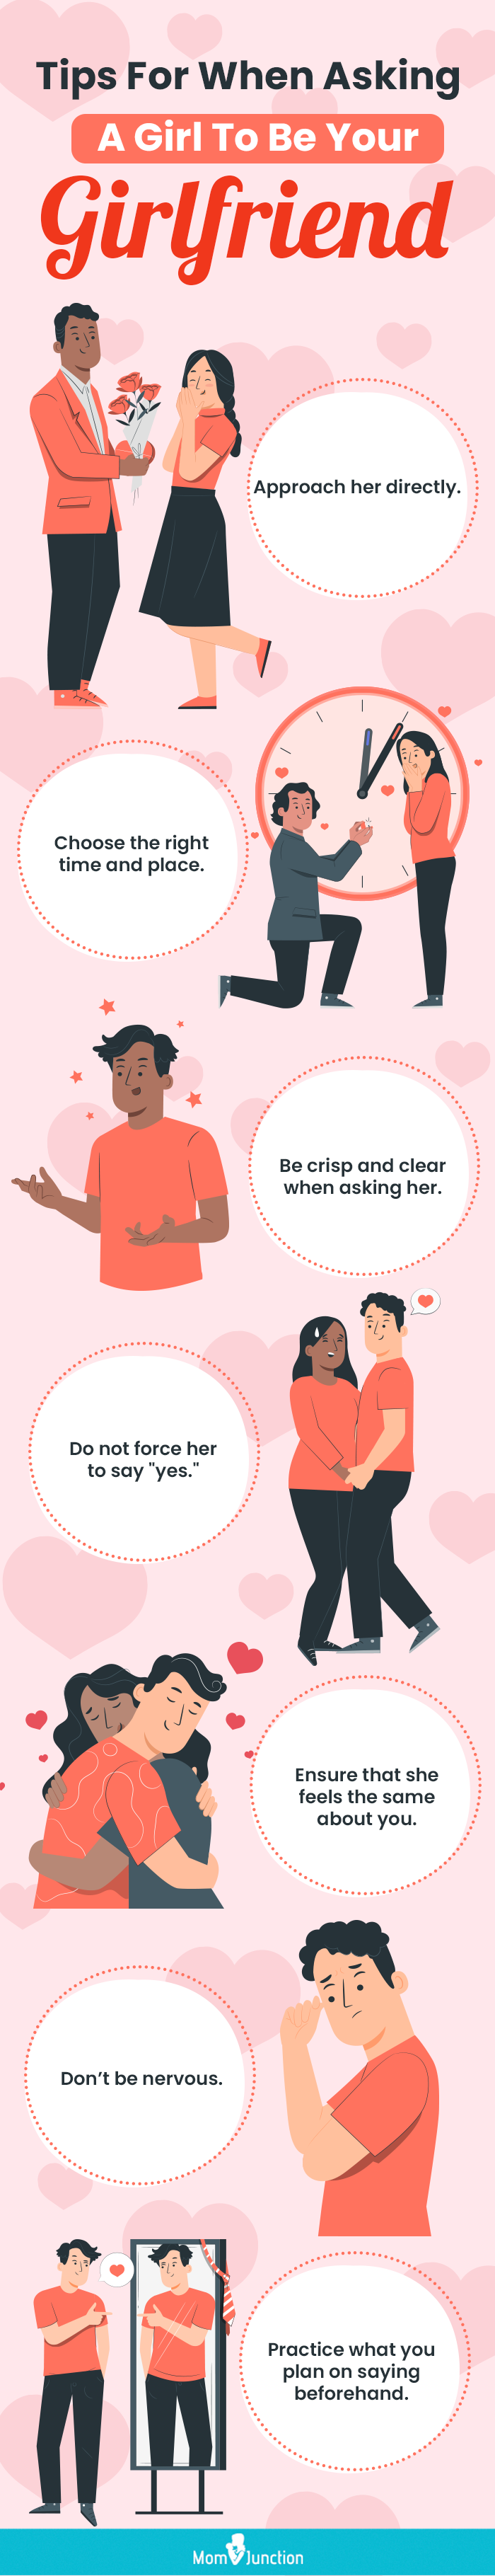 tips for when asking a girl to be your girlfriend (infographic)